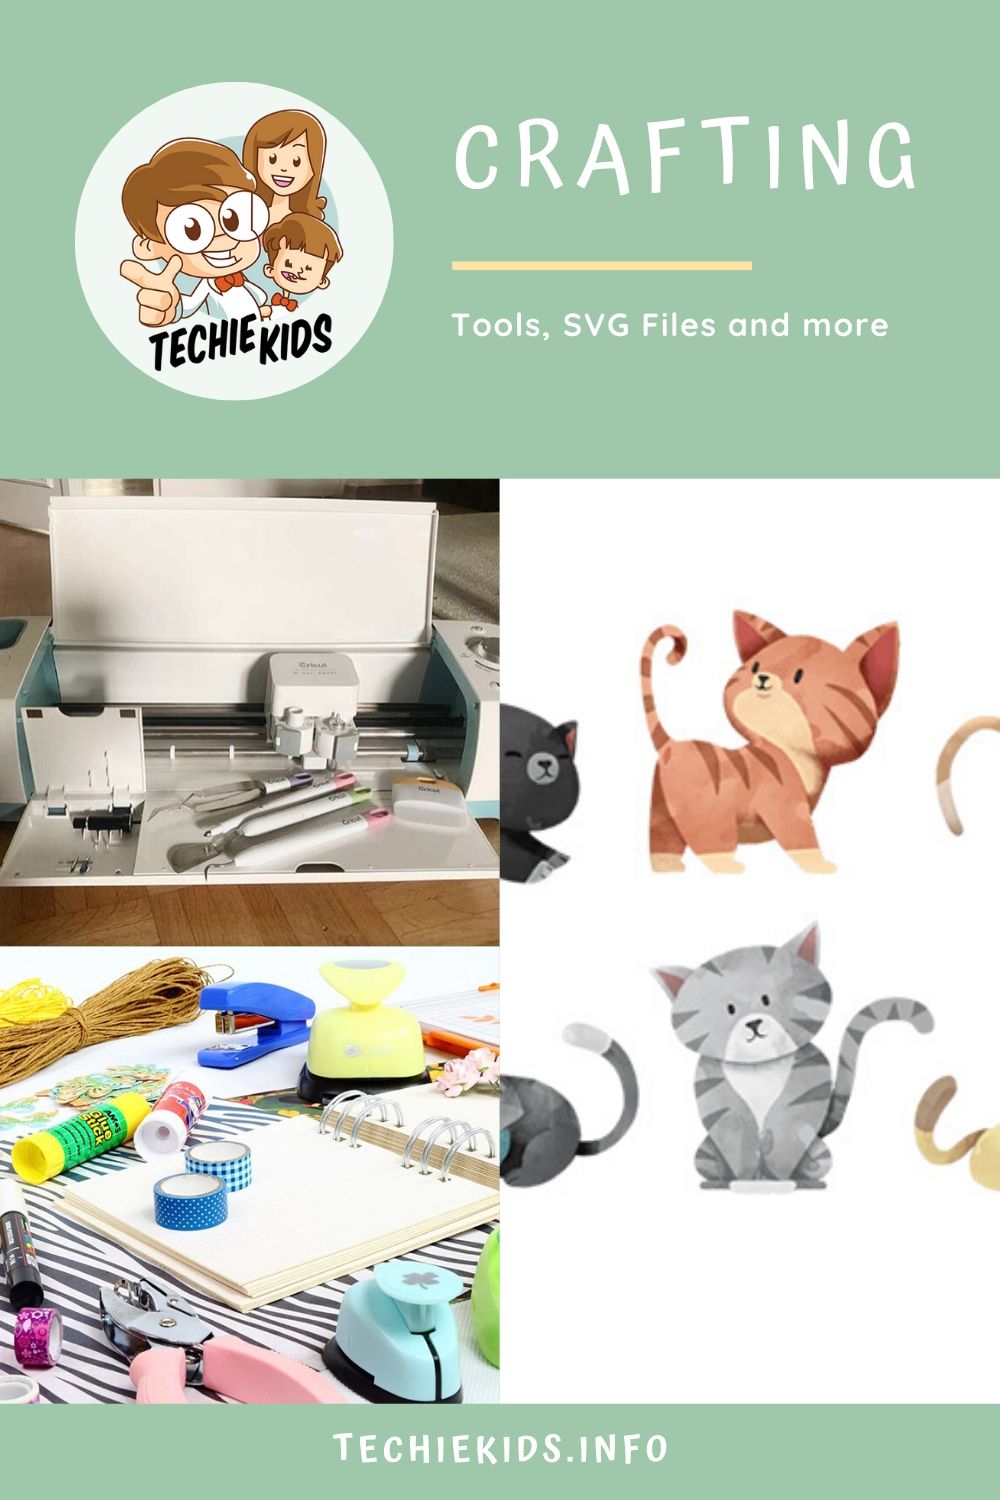 SVG Files and Crafting Tools With Techie Kids